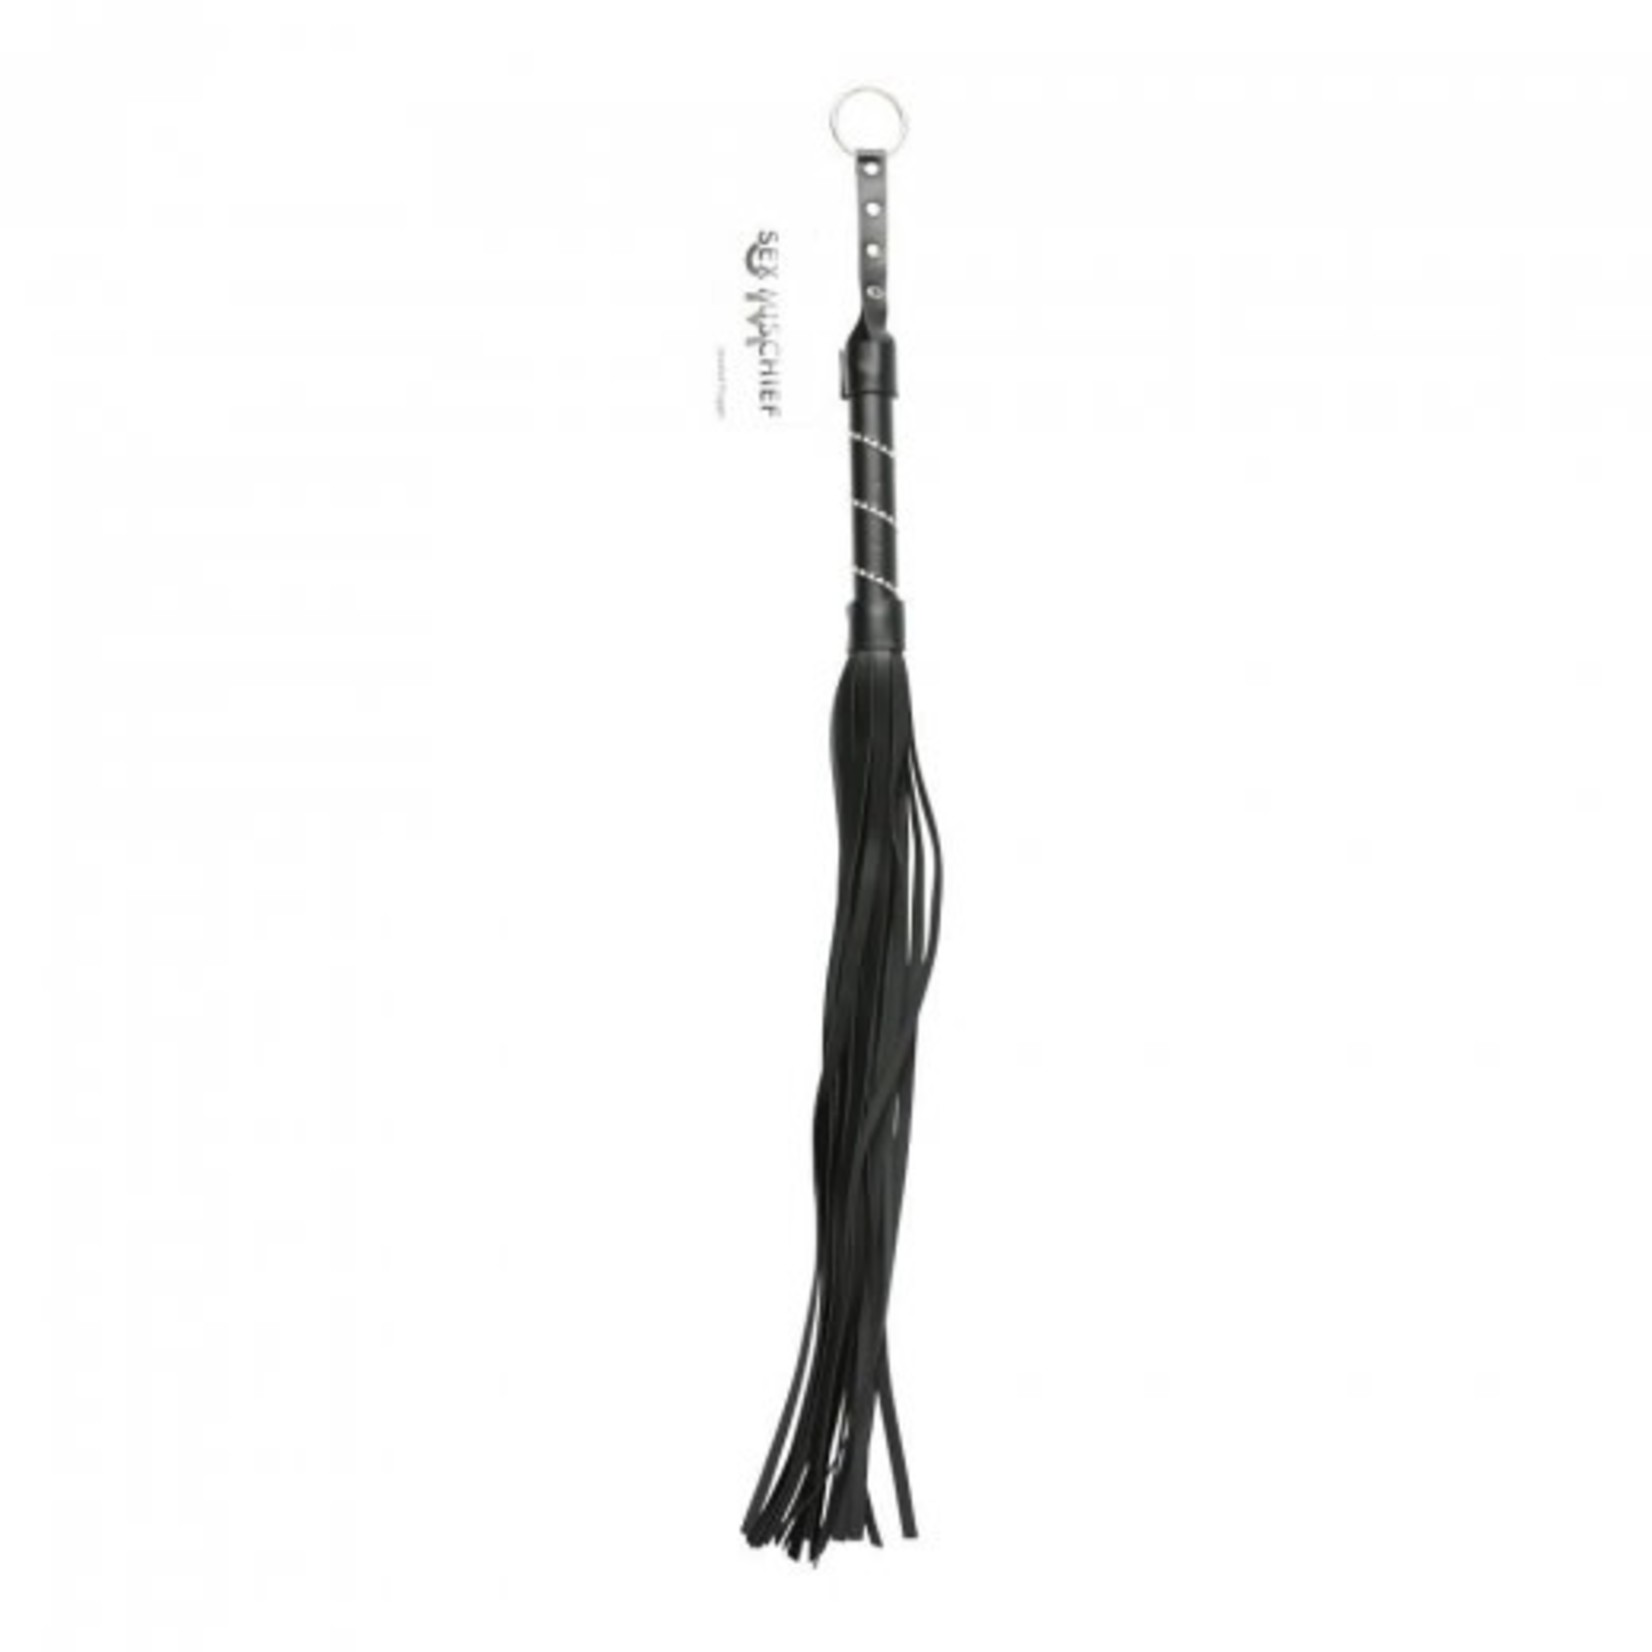 SEX & MISCHIEF SPORTSHEETS - S&M - JEWELED FLOGGER (SS100-44)